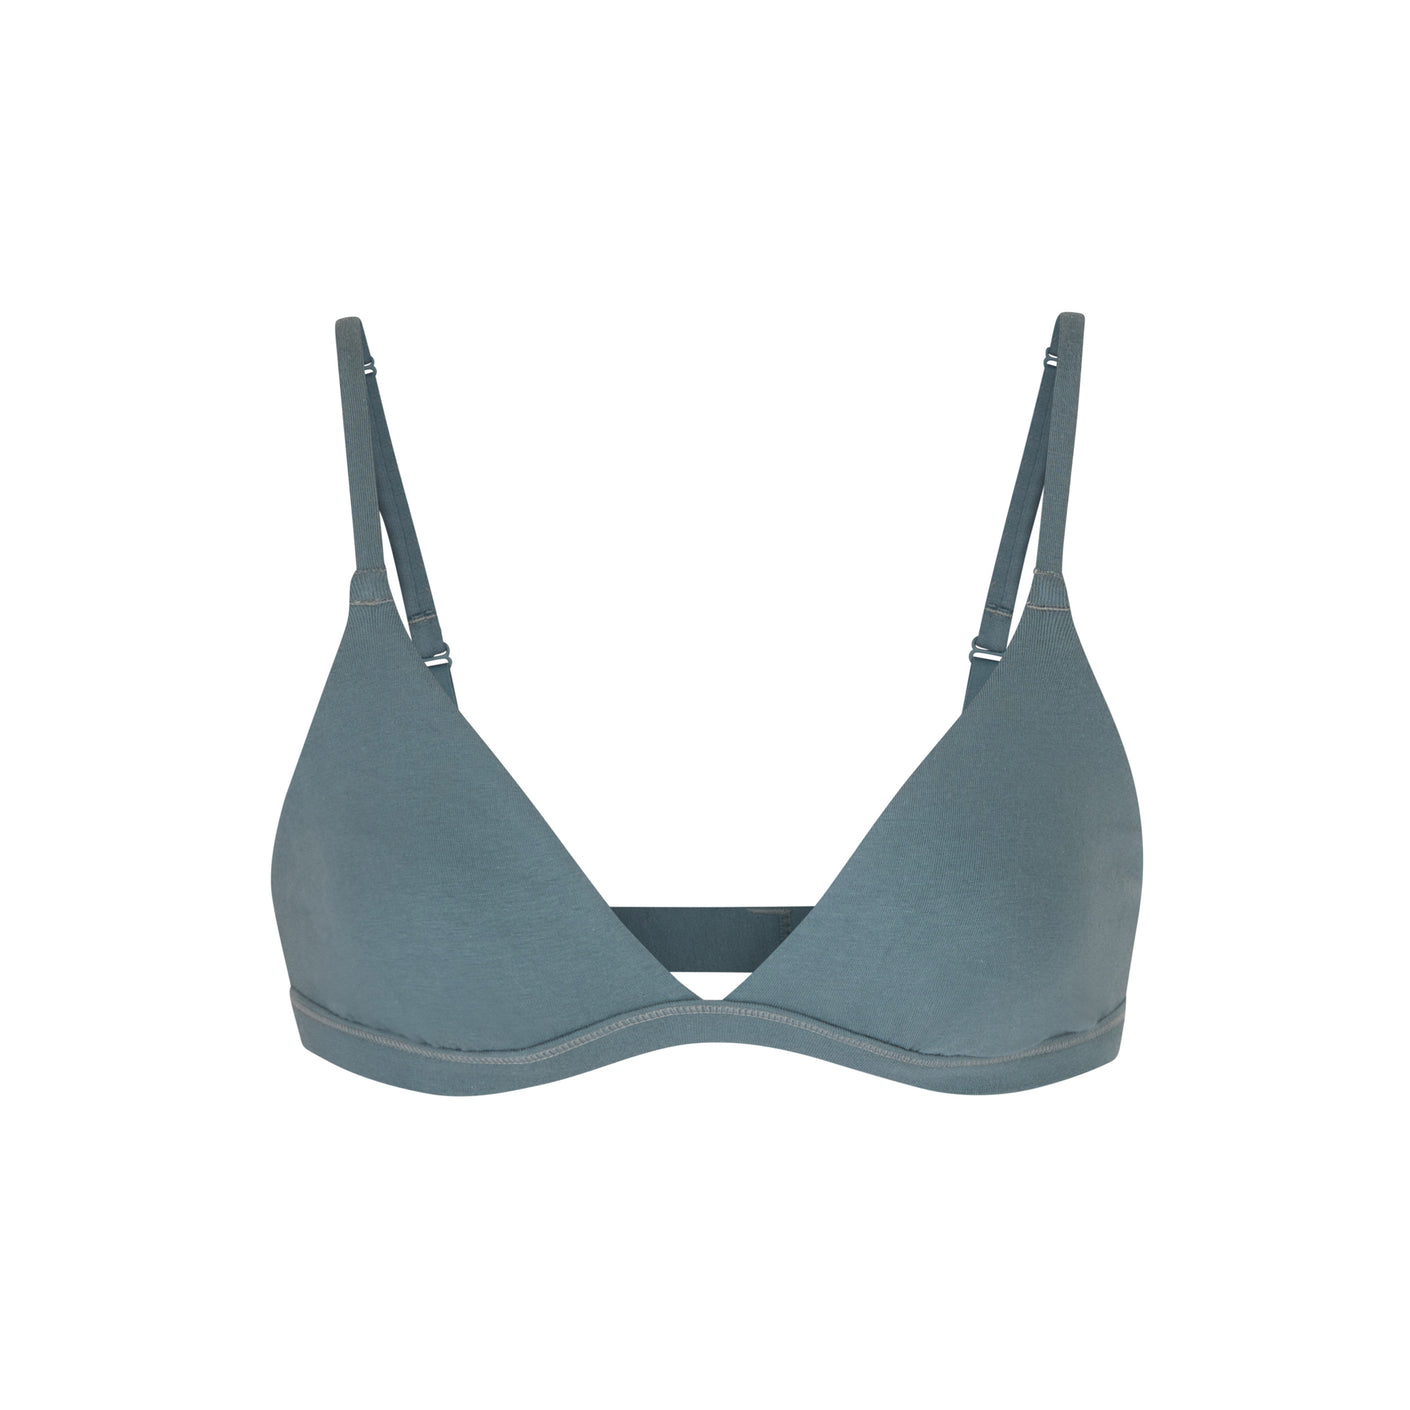 https://cdn.shopify.com/s/files/1/0259/5448/4284/products/SKIMS-BRA-BR-TRI-0267-SEA-FL_e203a3be-d263-4fa2-9866-f4223970c588.jpg?v=1623779751&width=1410&height=1410